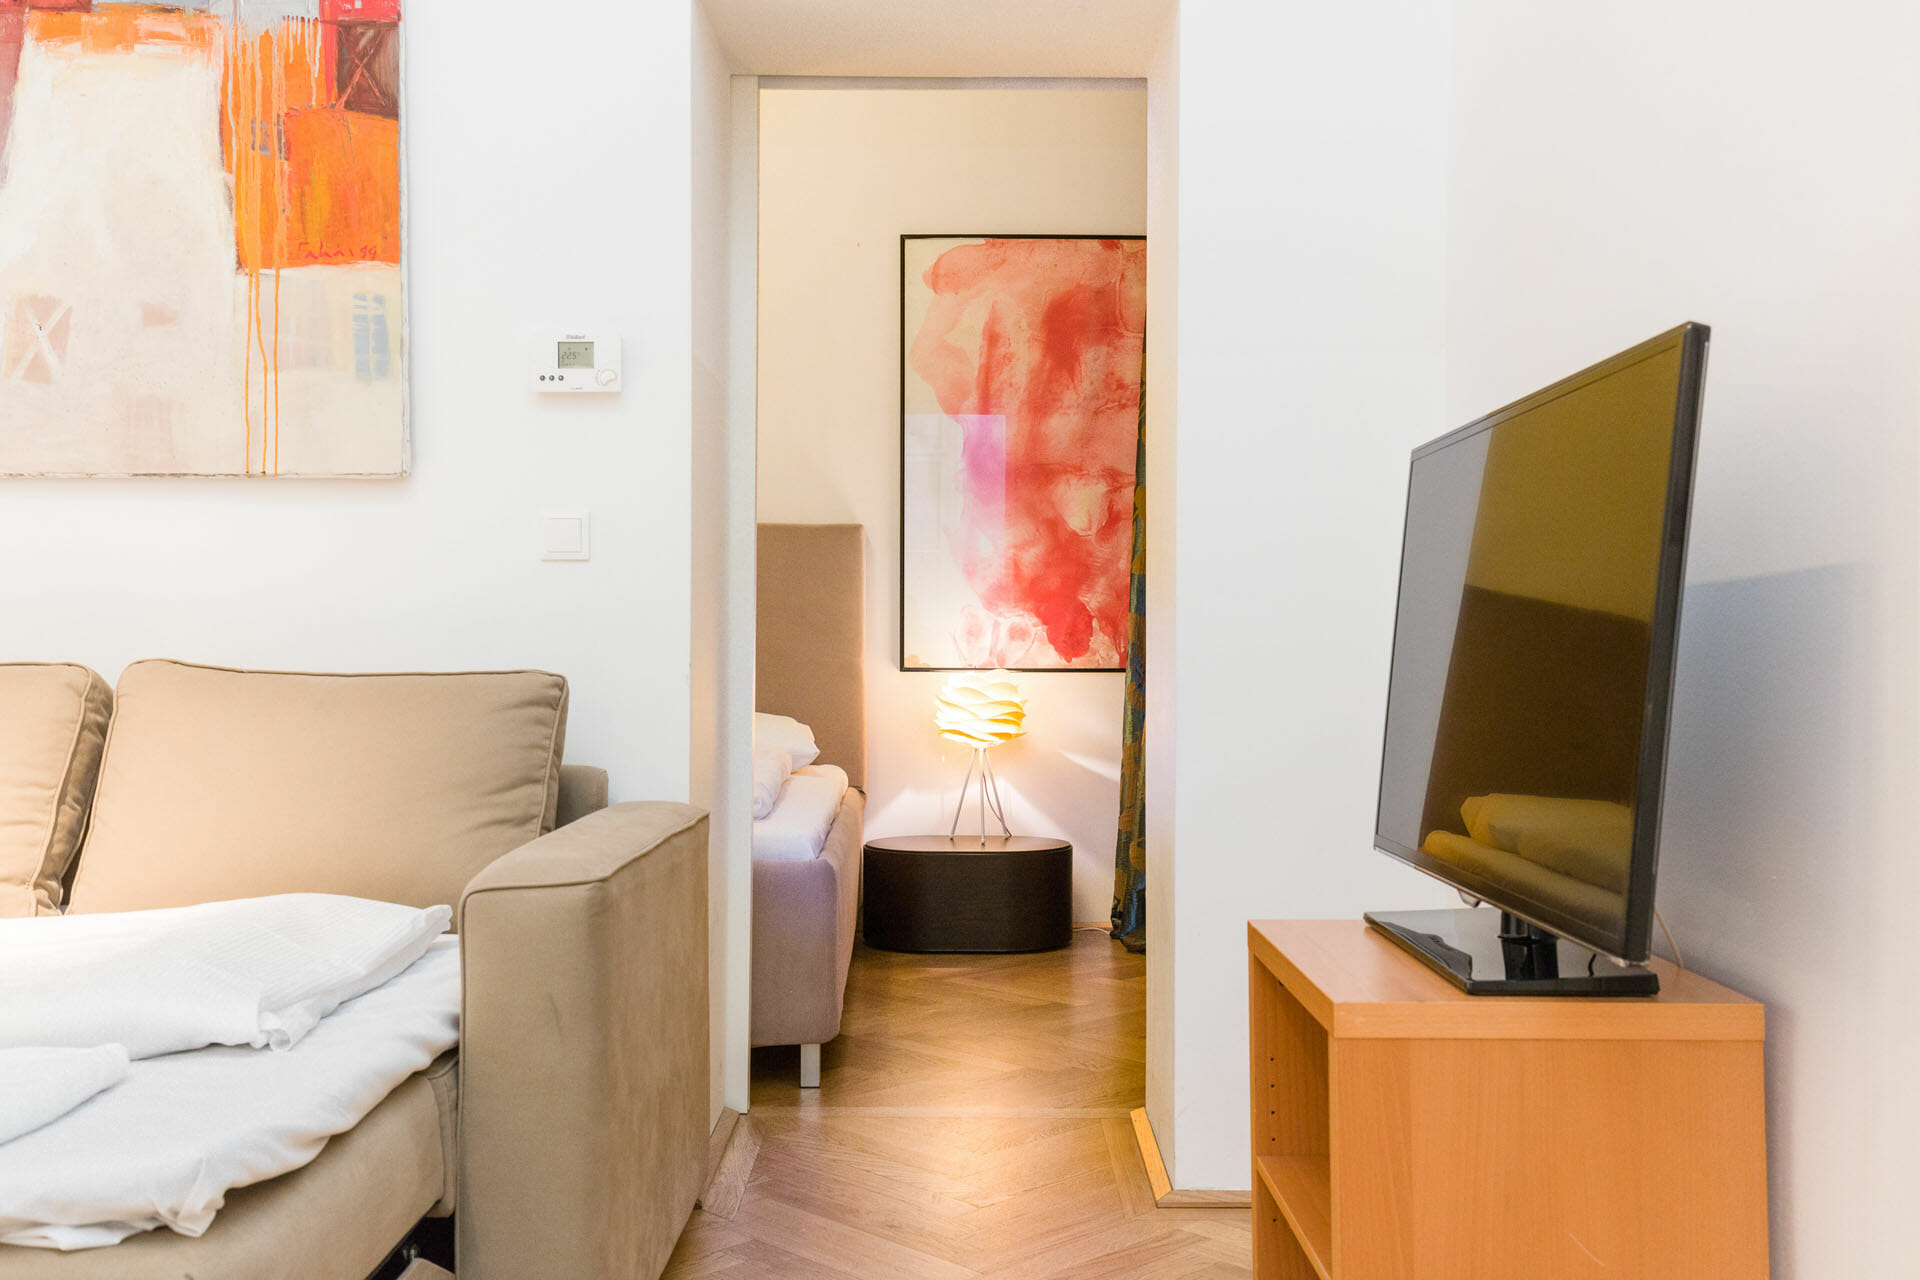 Prestige Apartments in Vienna. Ideal city center of Vienna the Graben.The apartment is fully furnished, TV, Cable, wireless, king size bed, cafe machine, wash machine and lots more. The apartment has recently been renovated and newly furnished in a modern, elegant design.